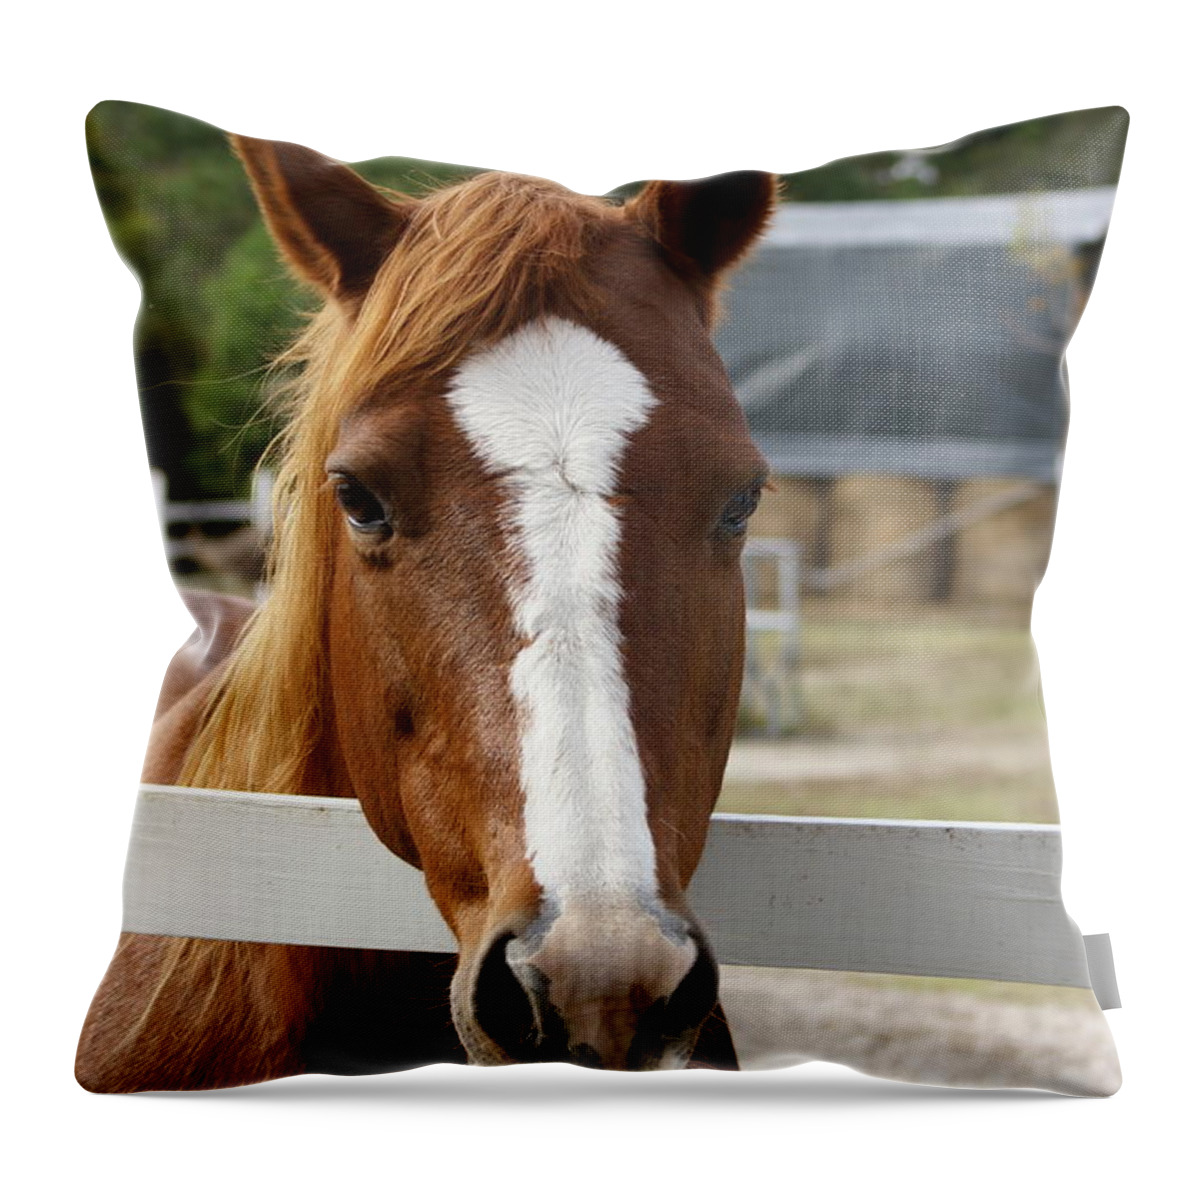  Throw Pillow featuring the photograph Horse Welcome by Heather E Harman